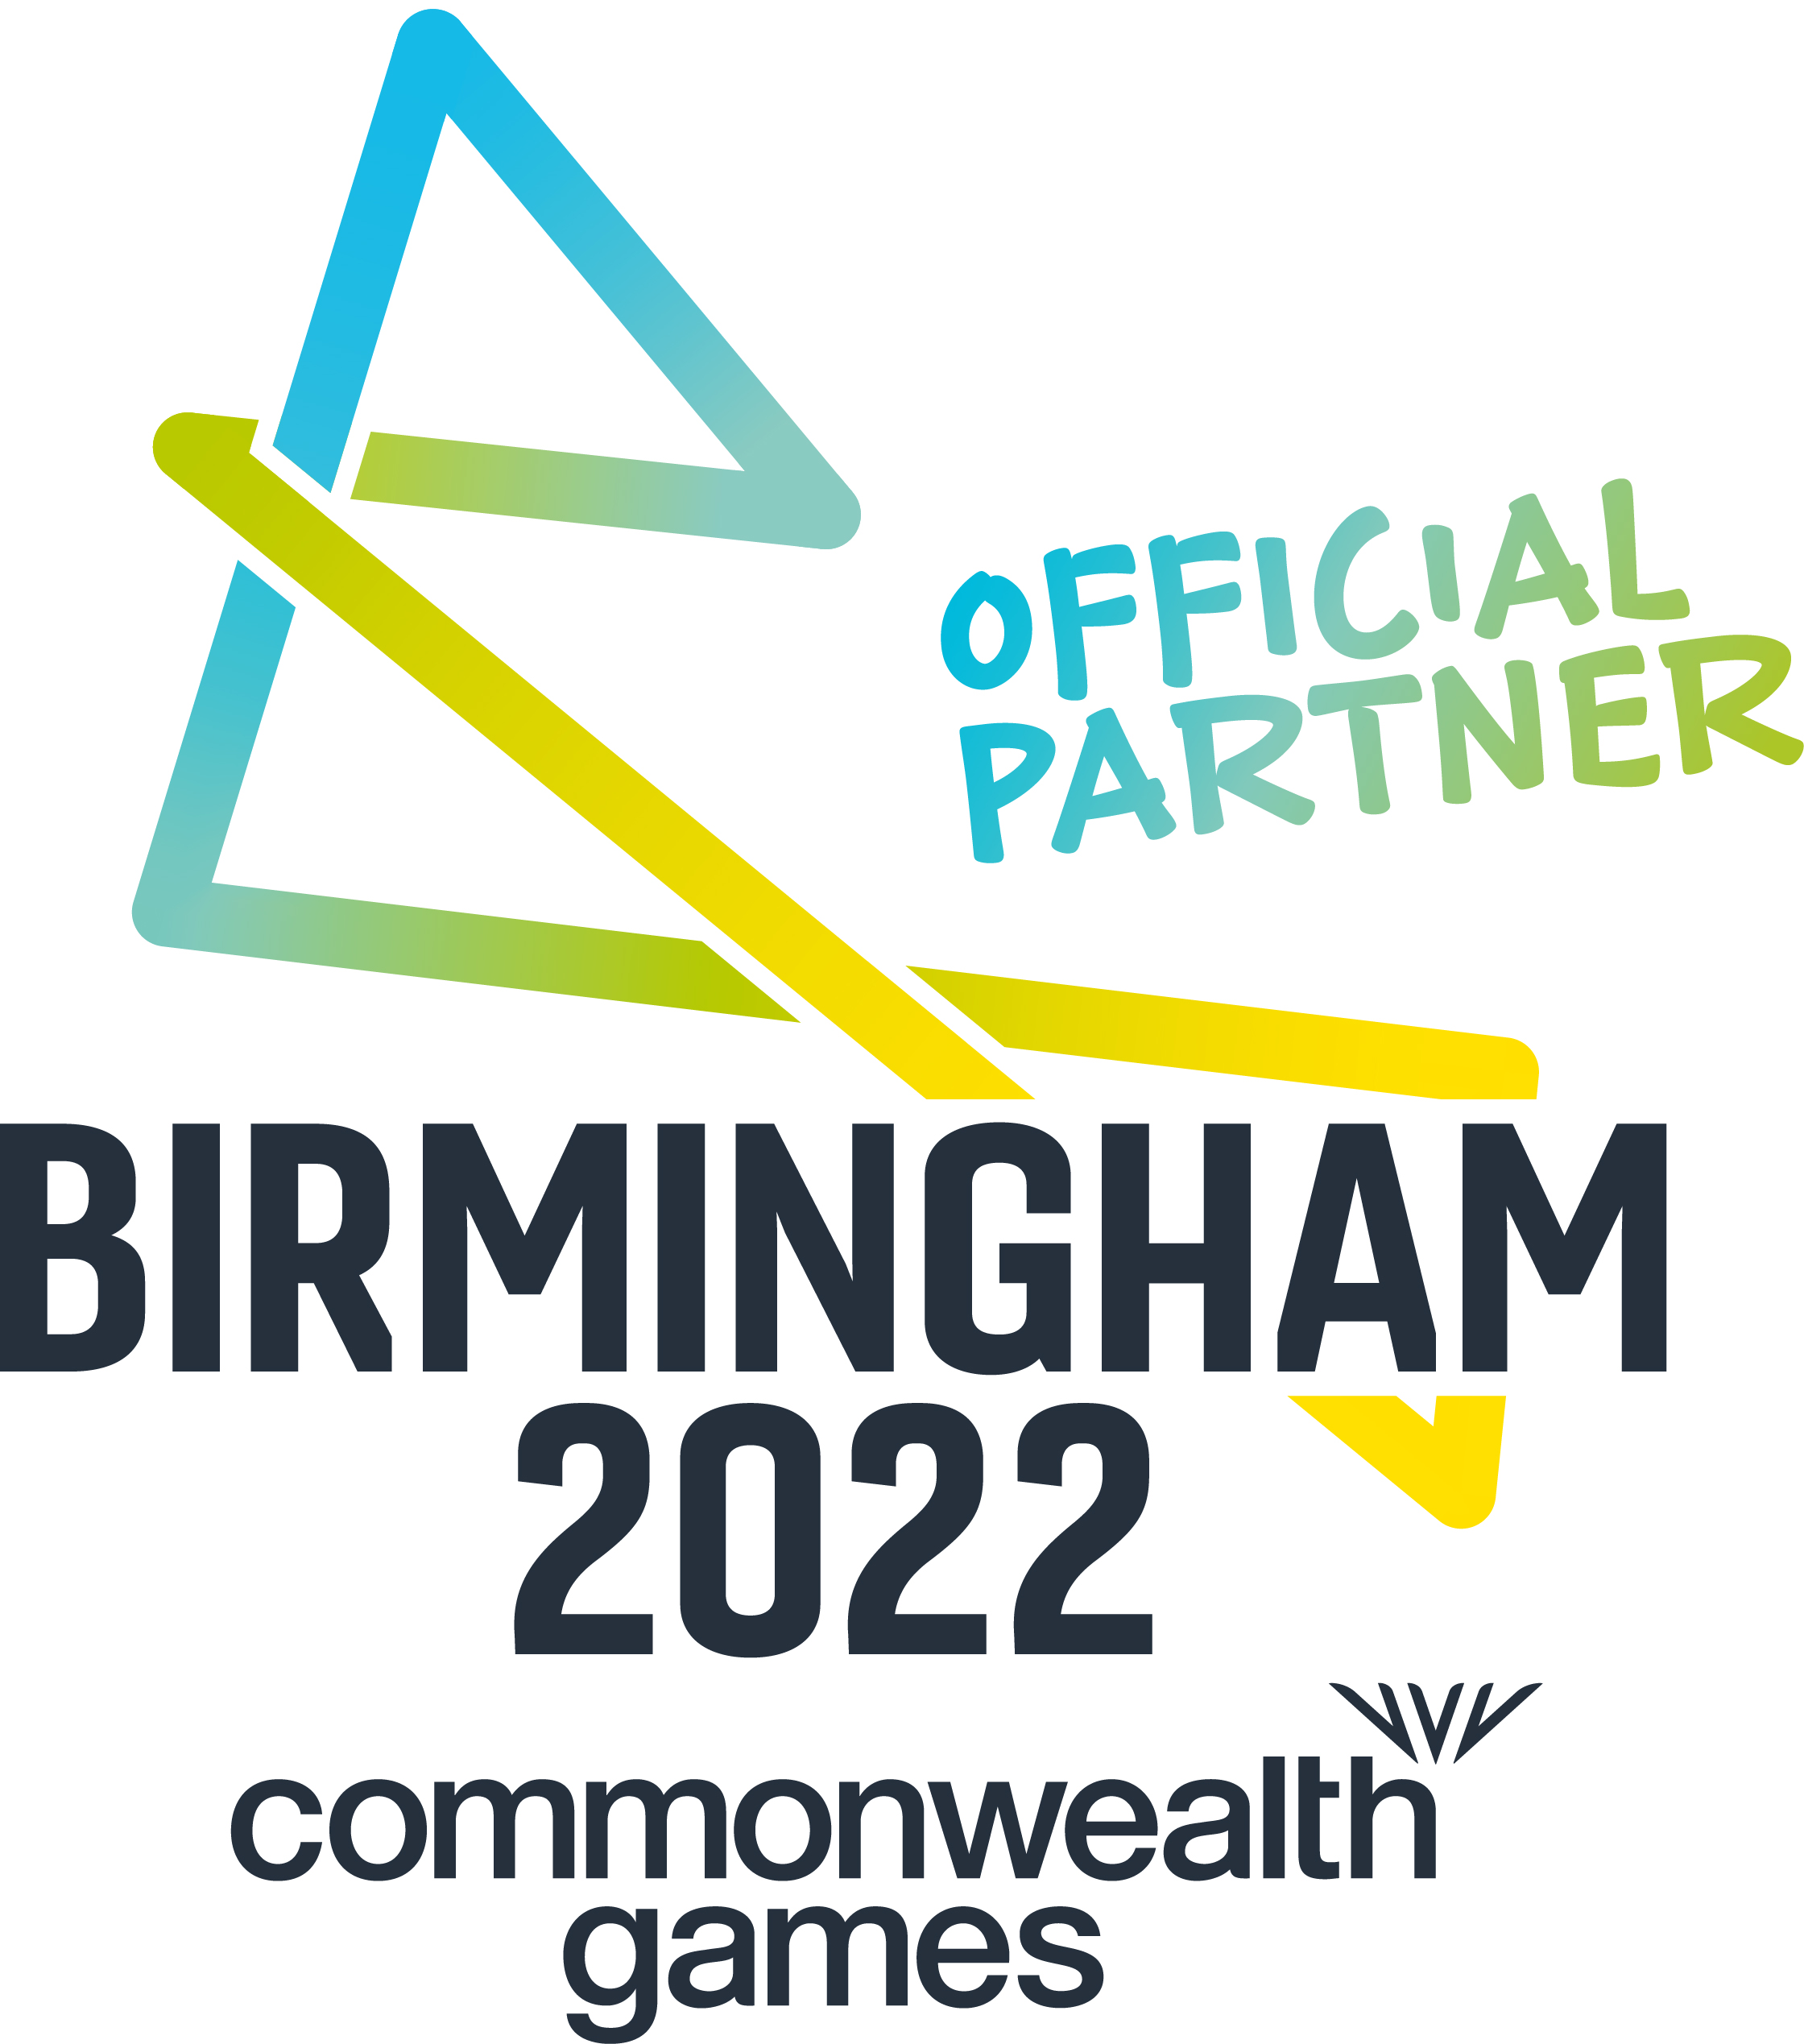 Image shows the logo of the Birmingham 2022 Commonwealth Games and Official Partner.